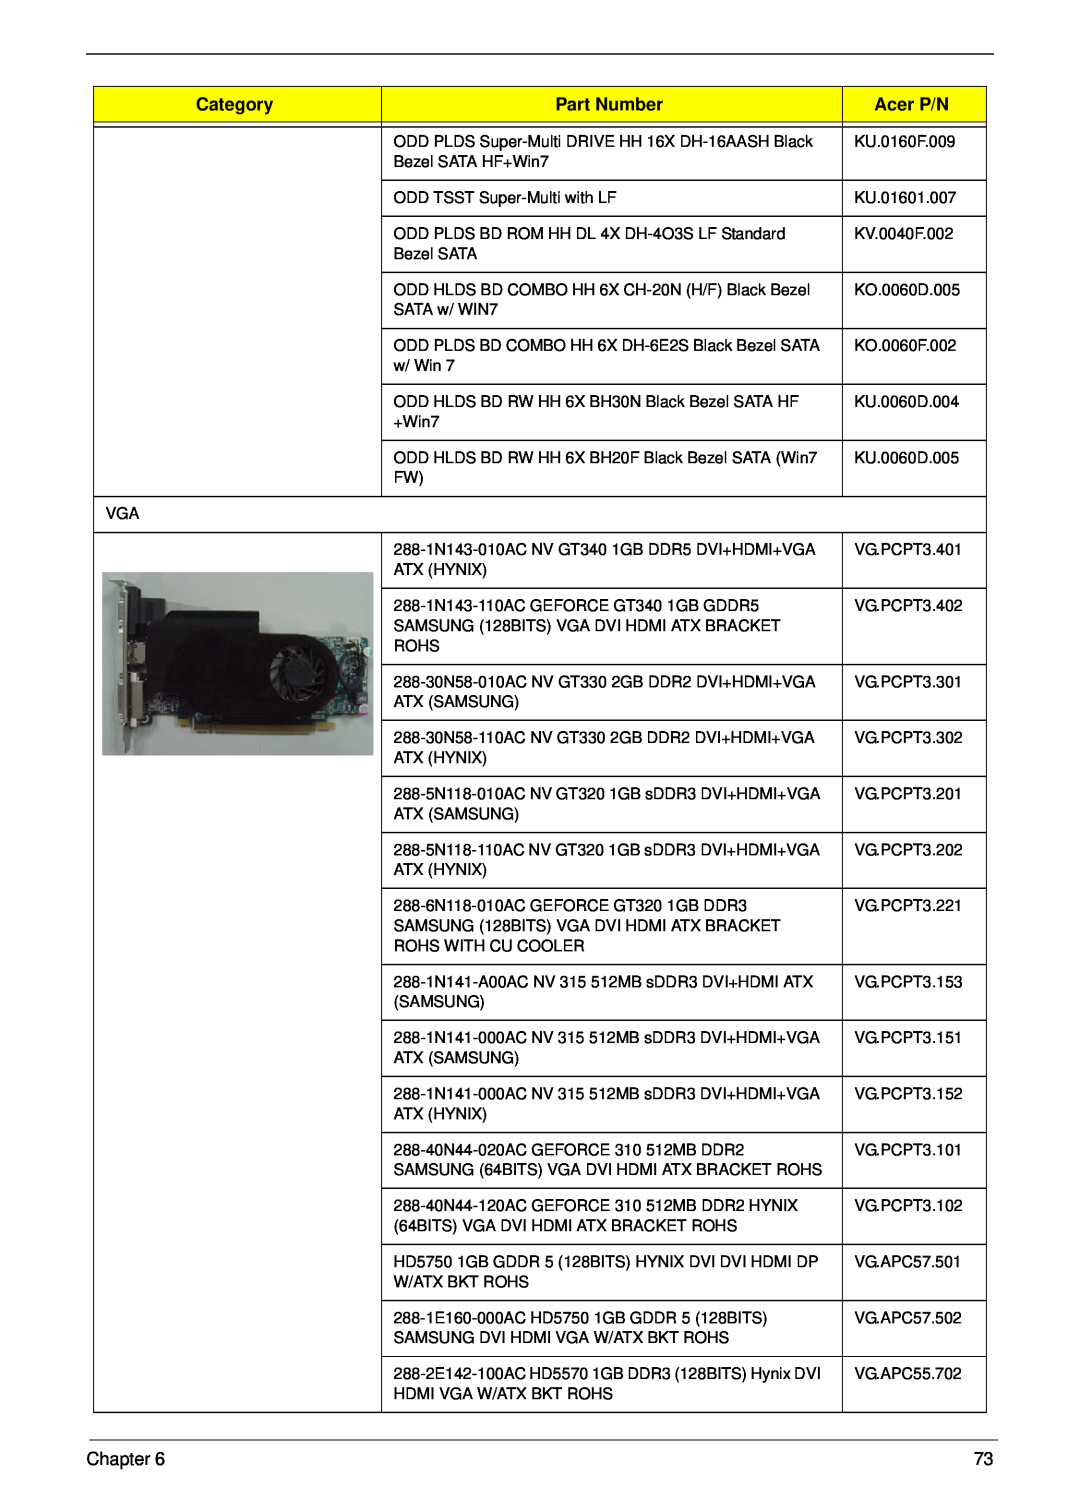 Acer m3400(g) manual Category, Part Number, Acer P/N, Chapter 